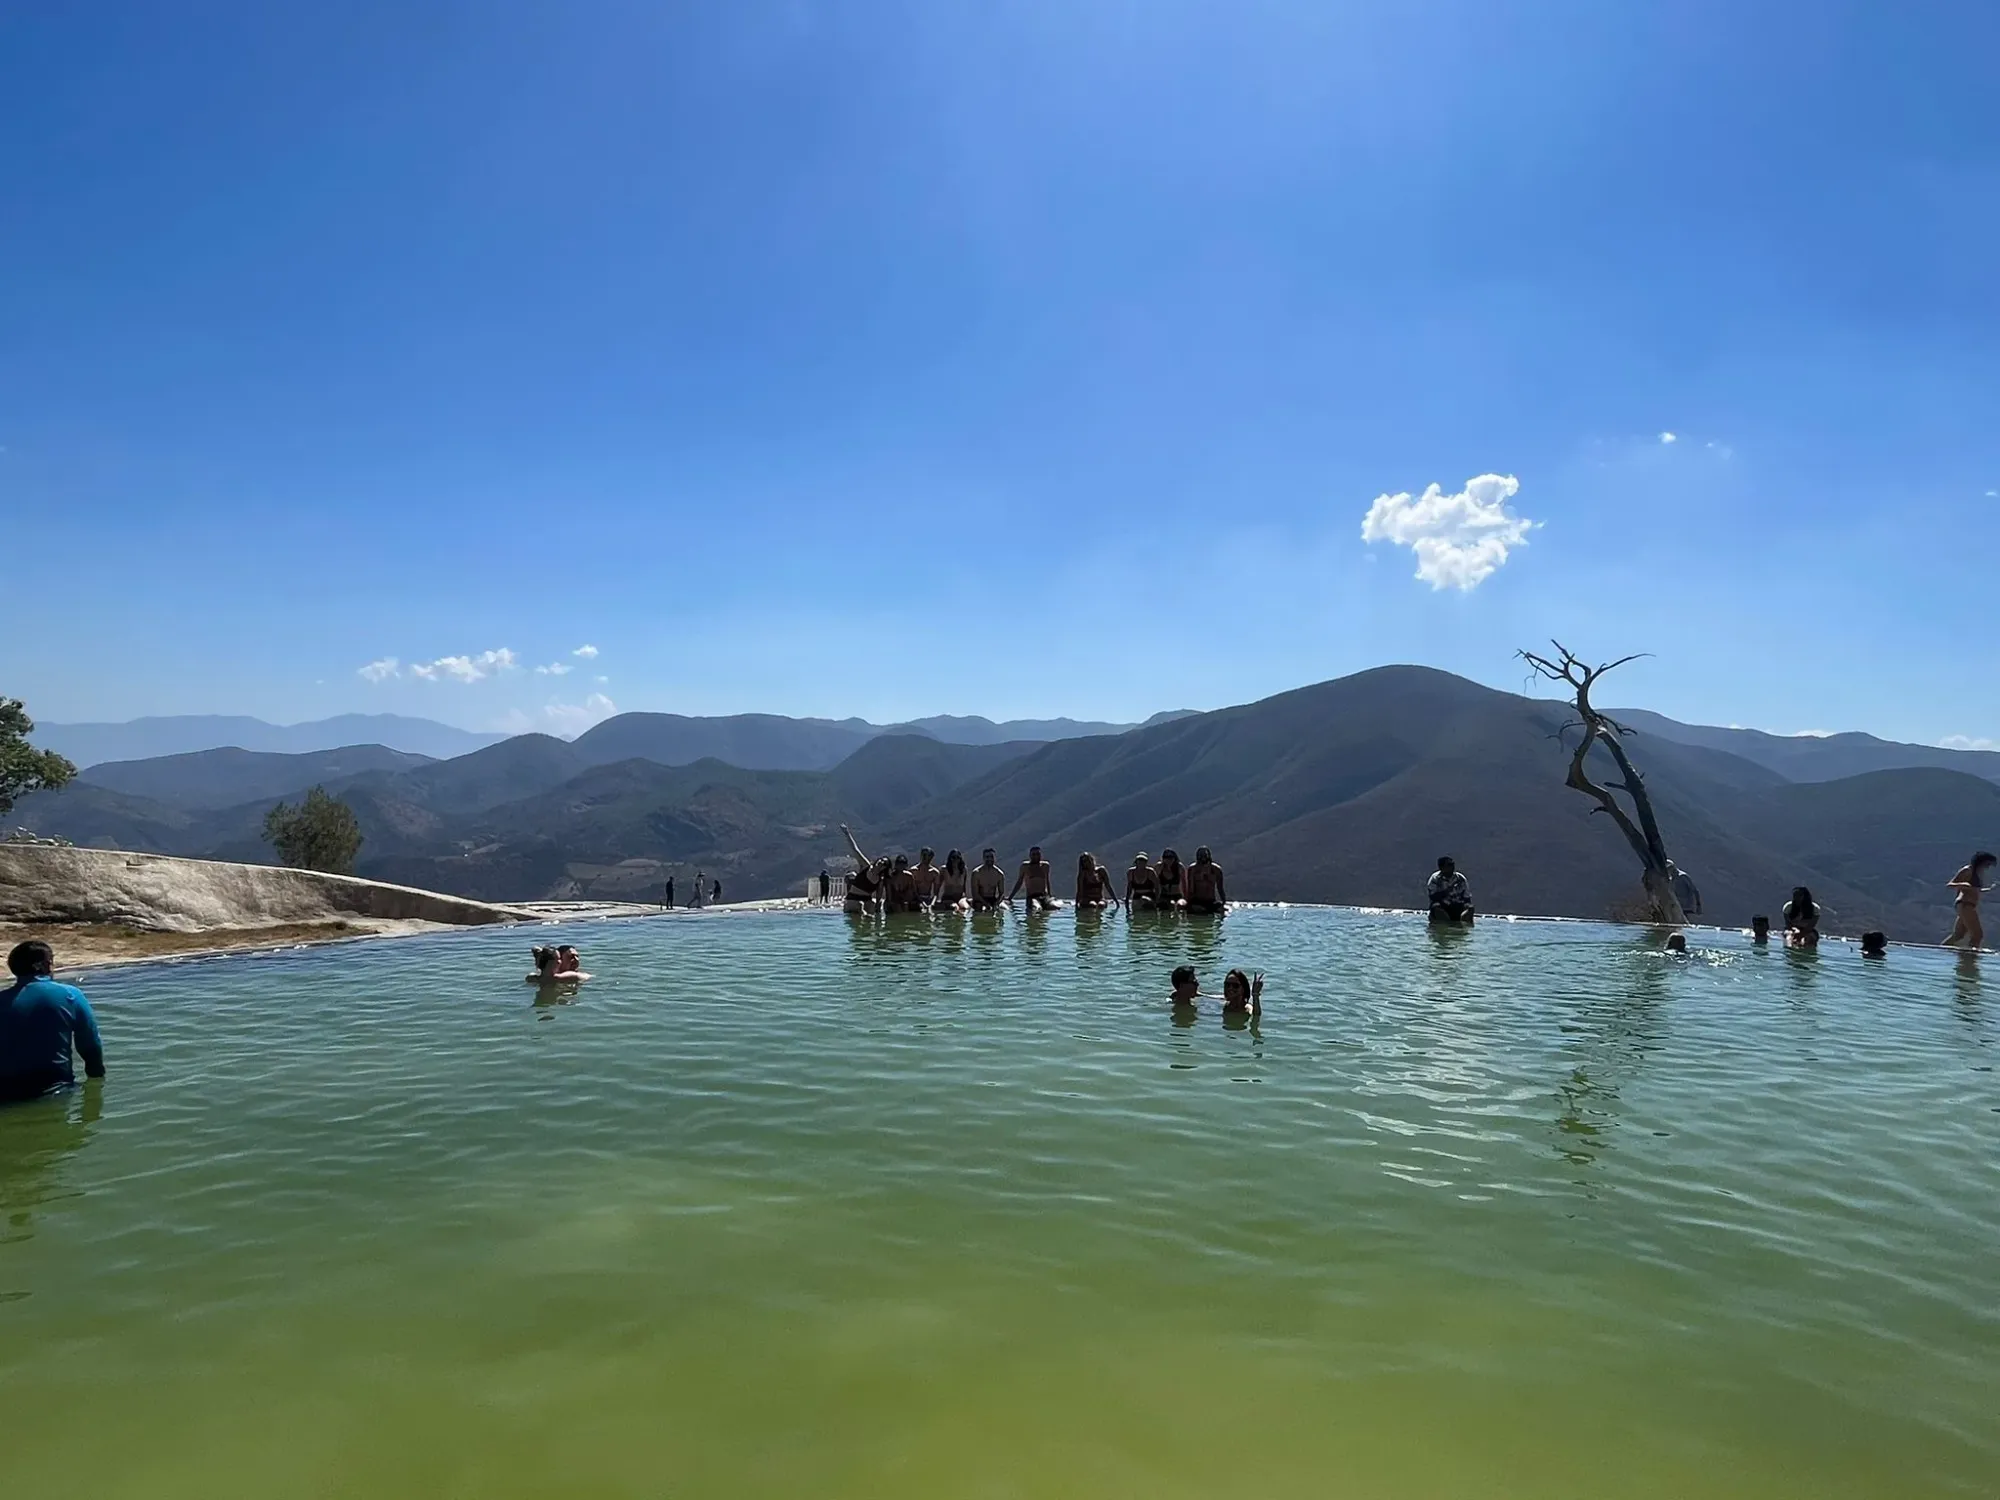 Digital nomads from around the globe soaking up the vibes (and stunning turquoise pools!) of Hierve El Agua, Oaxaca.